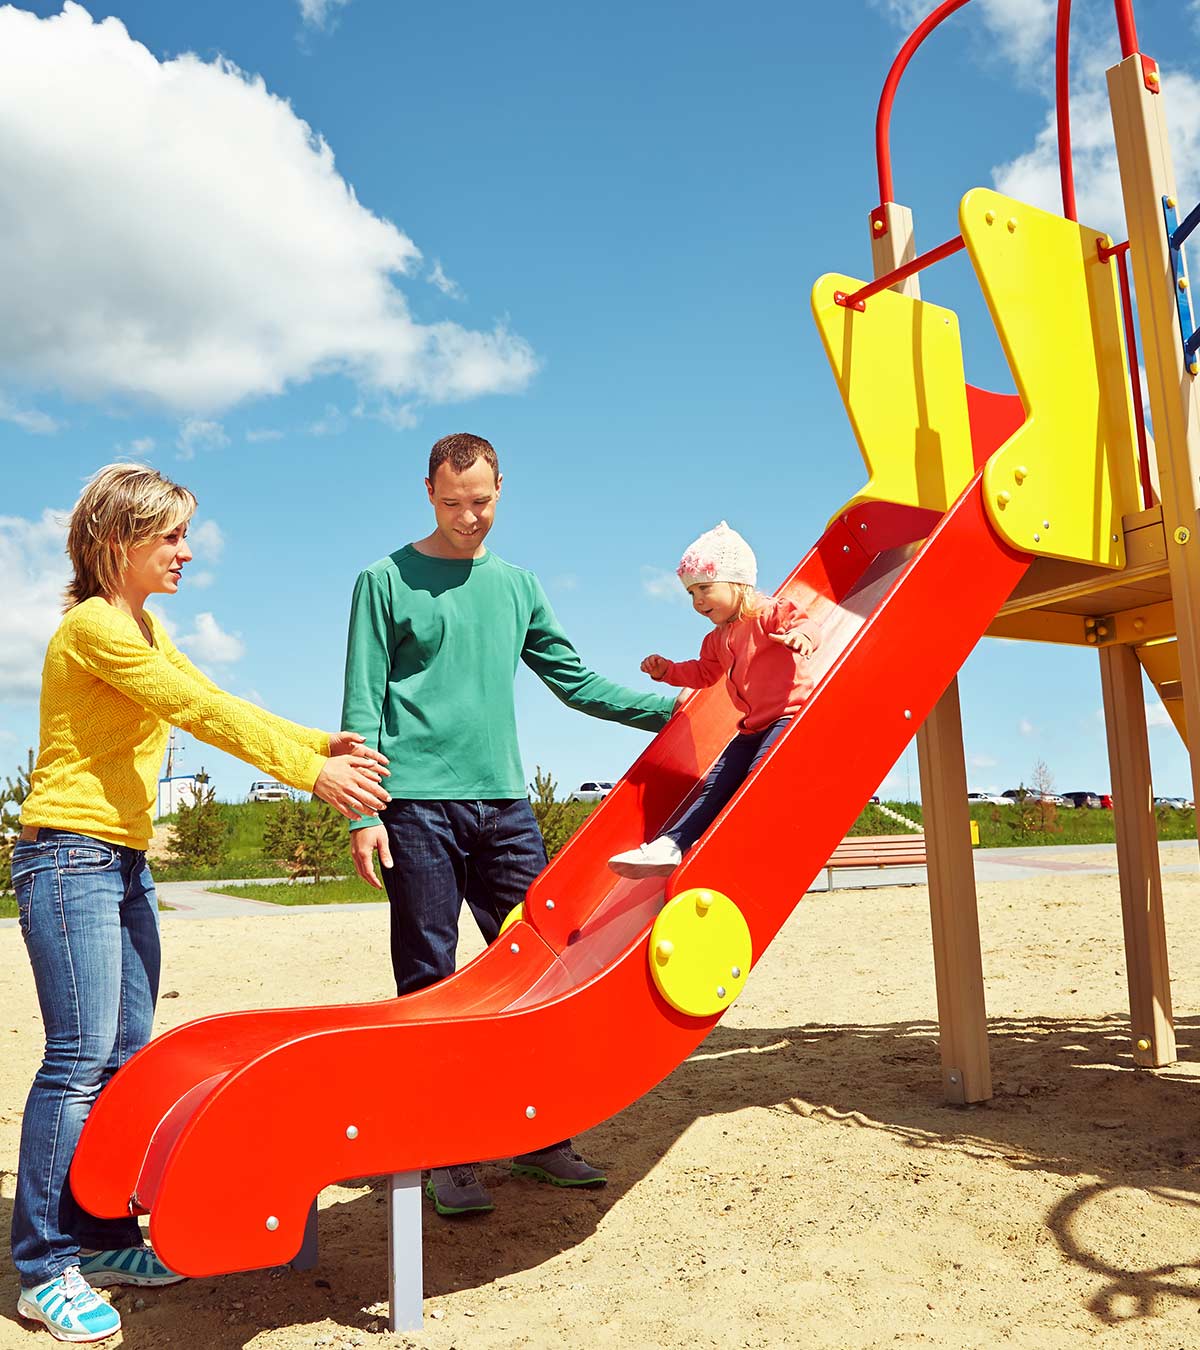 Playground Safety For Kids - Rules,Tips & Facts